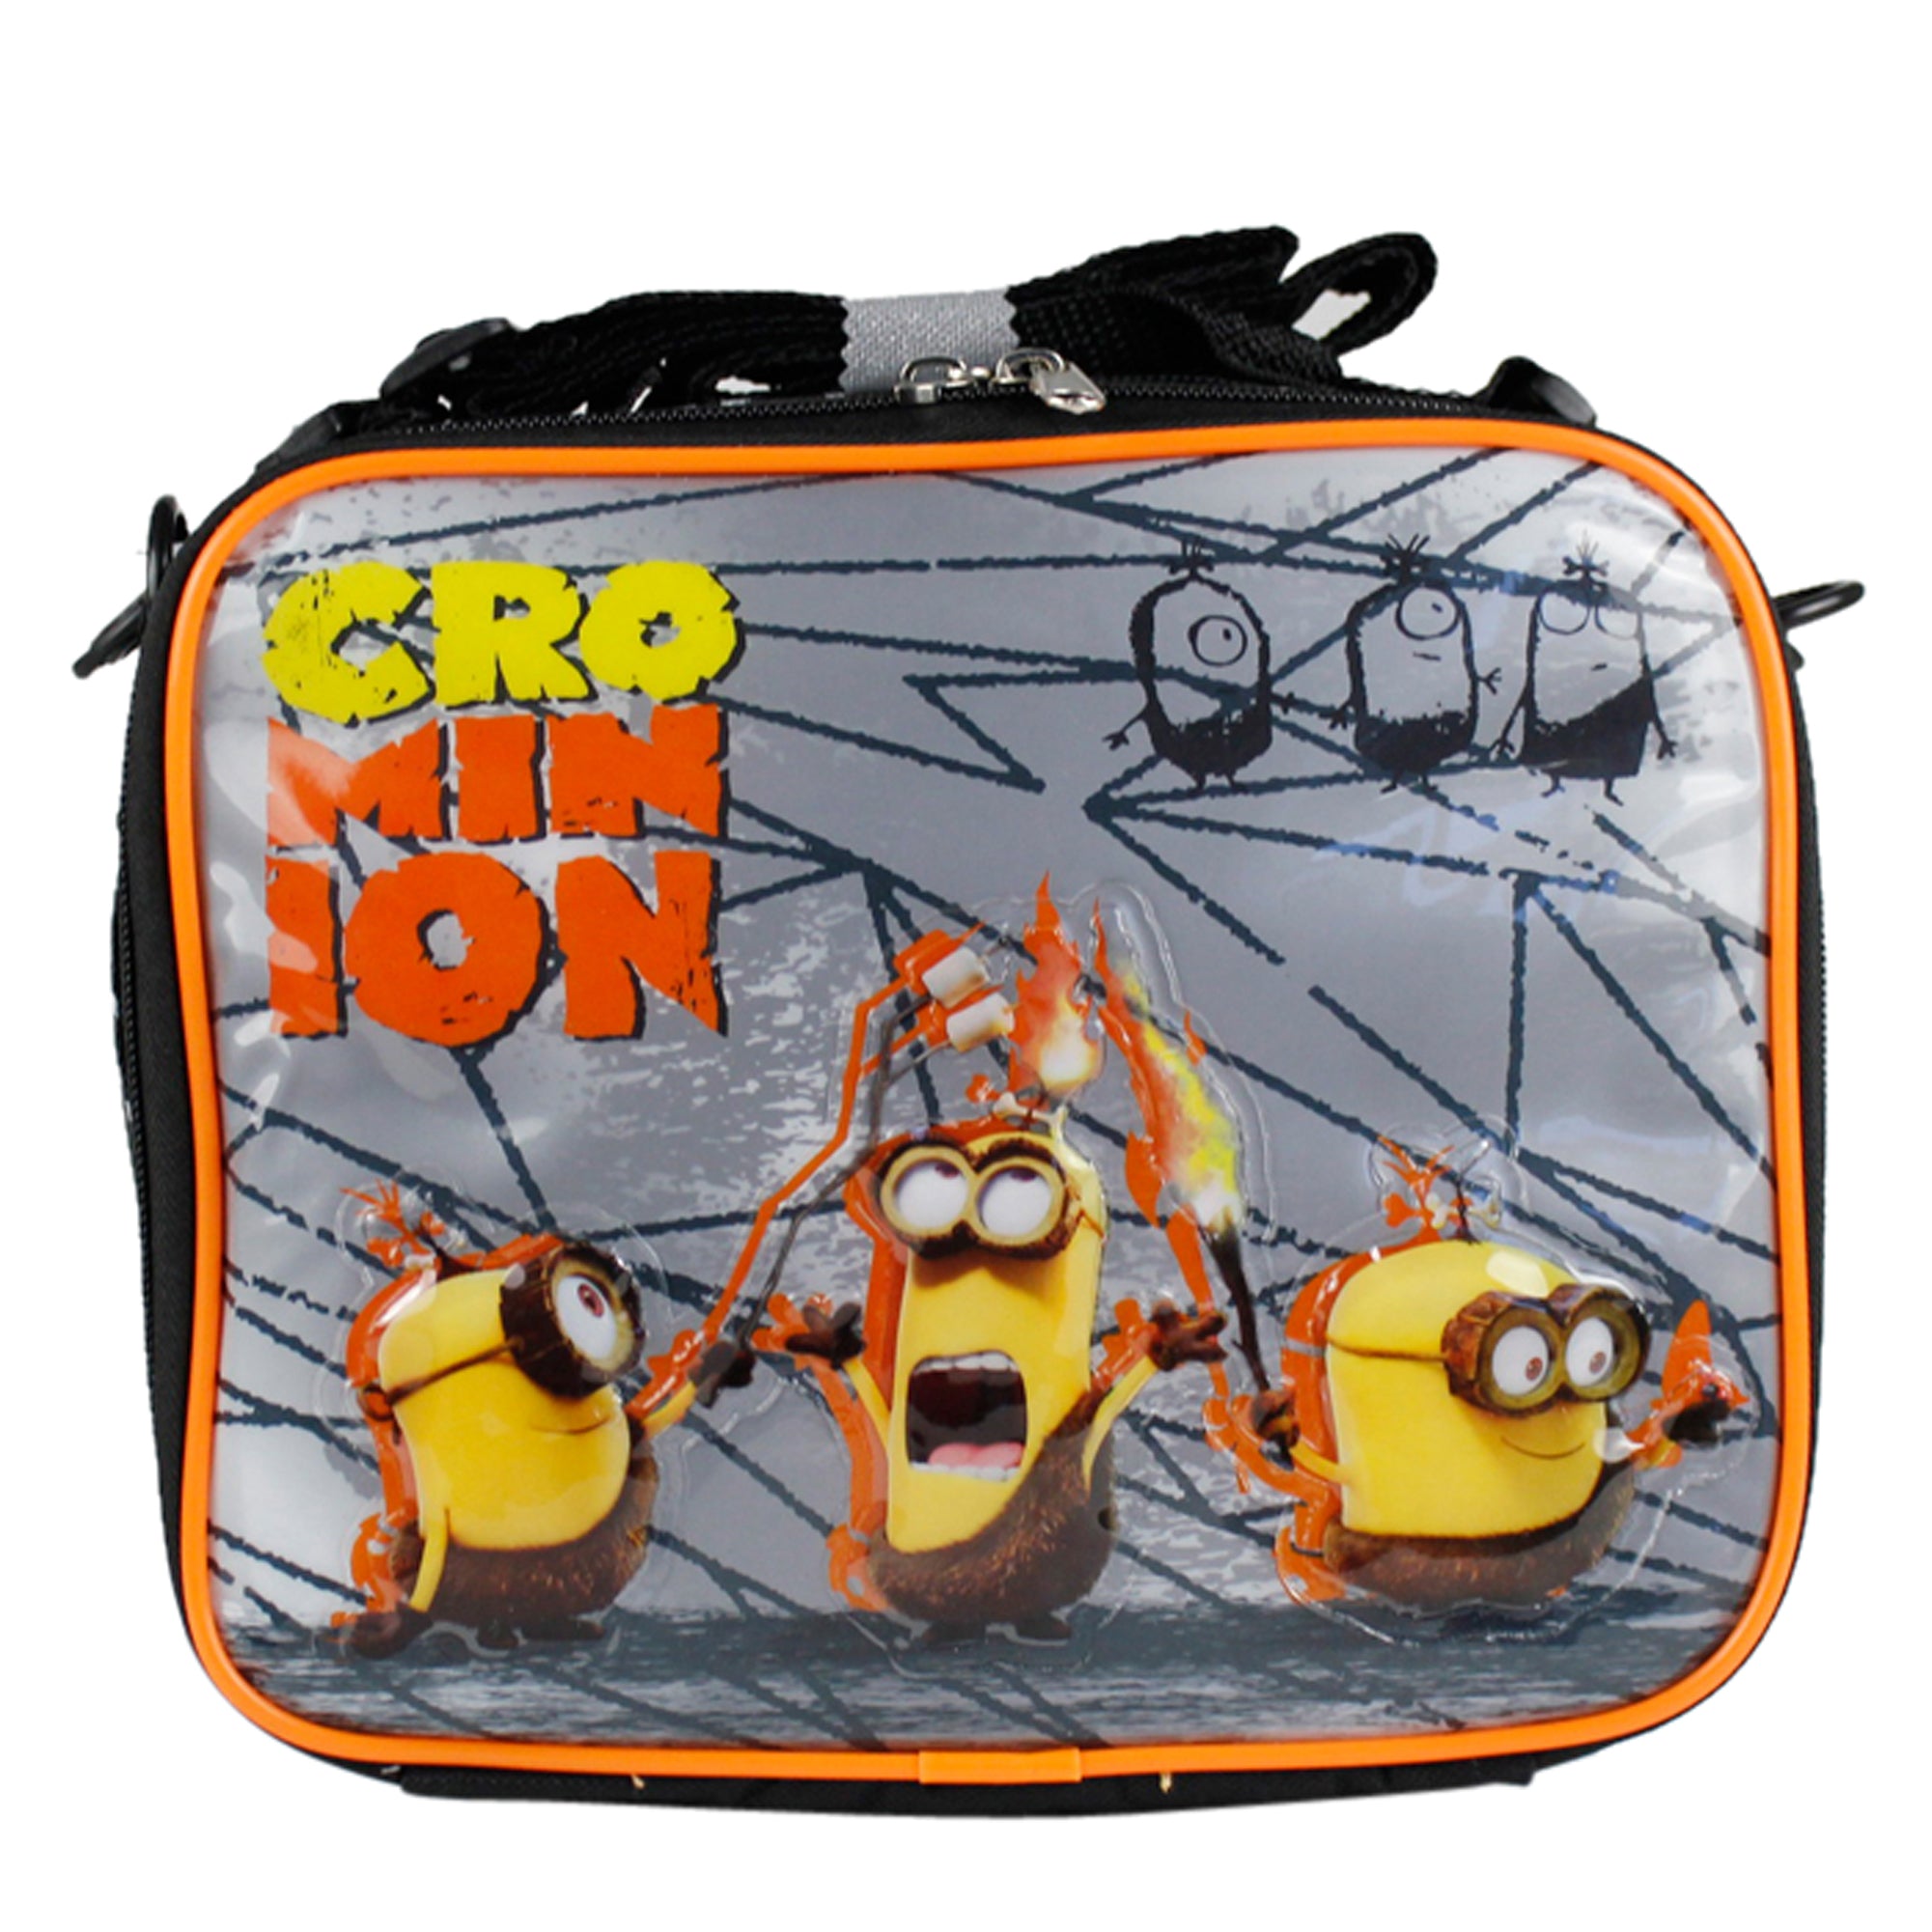 DESPICABLE ME MINIONS TEAM MINION 9.5 INSULATED LUNCHBOX LUNCH BAG-NEW